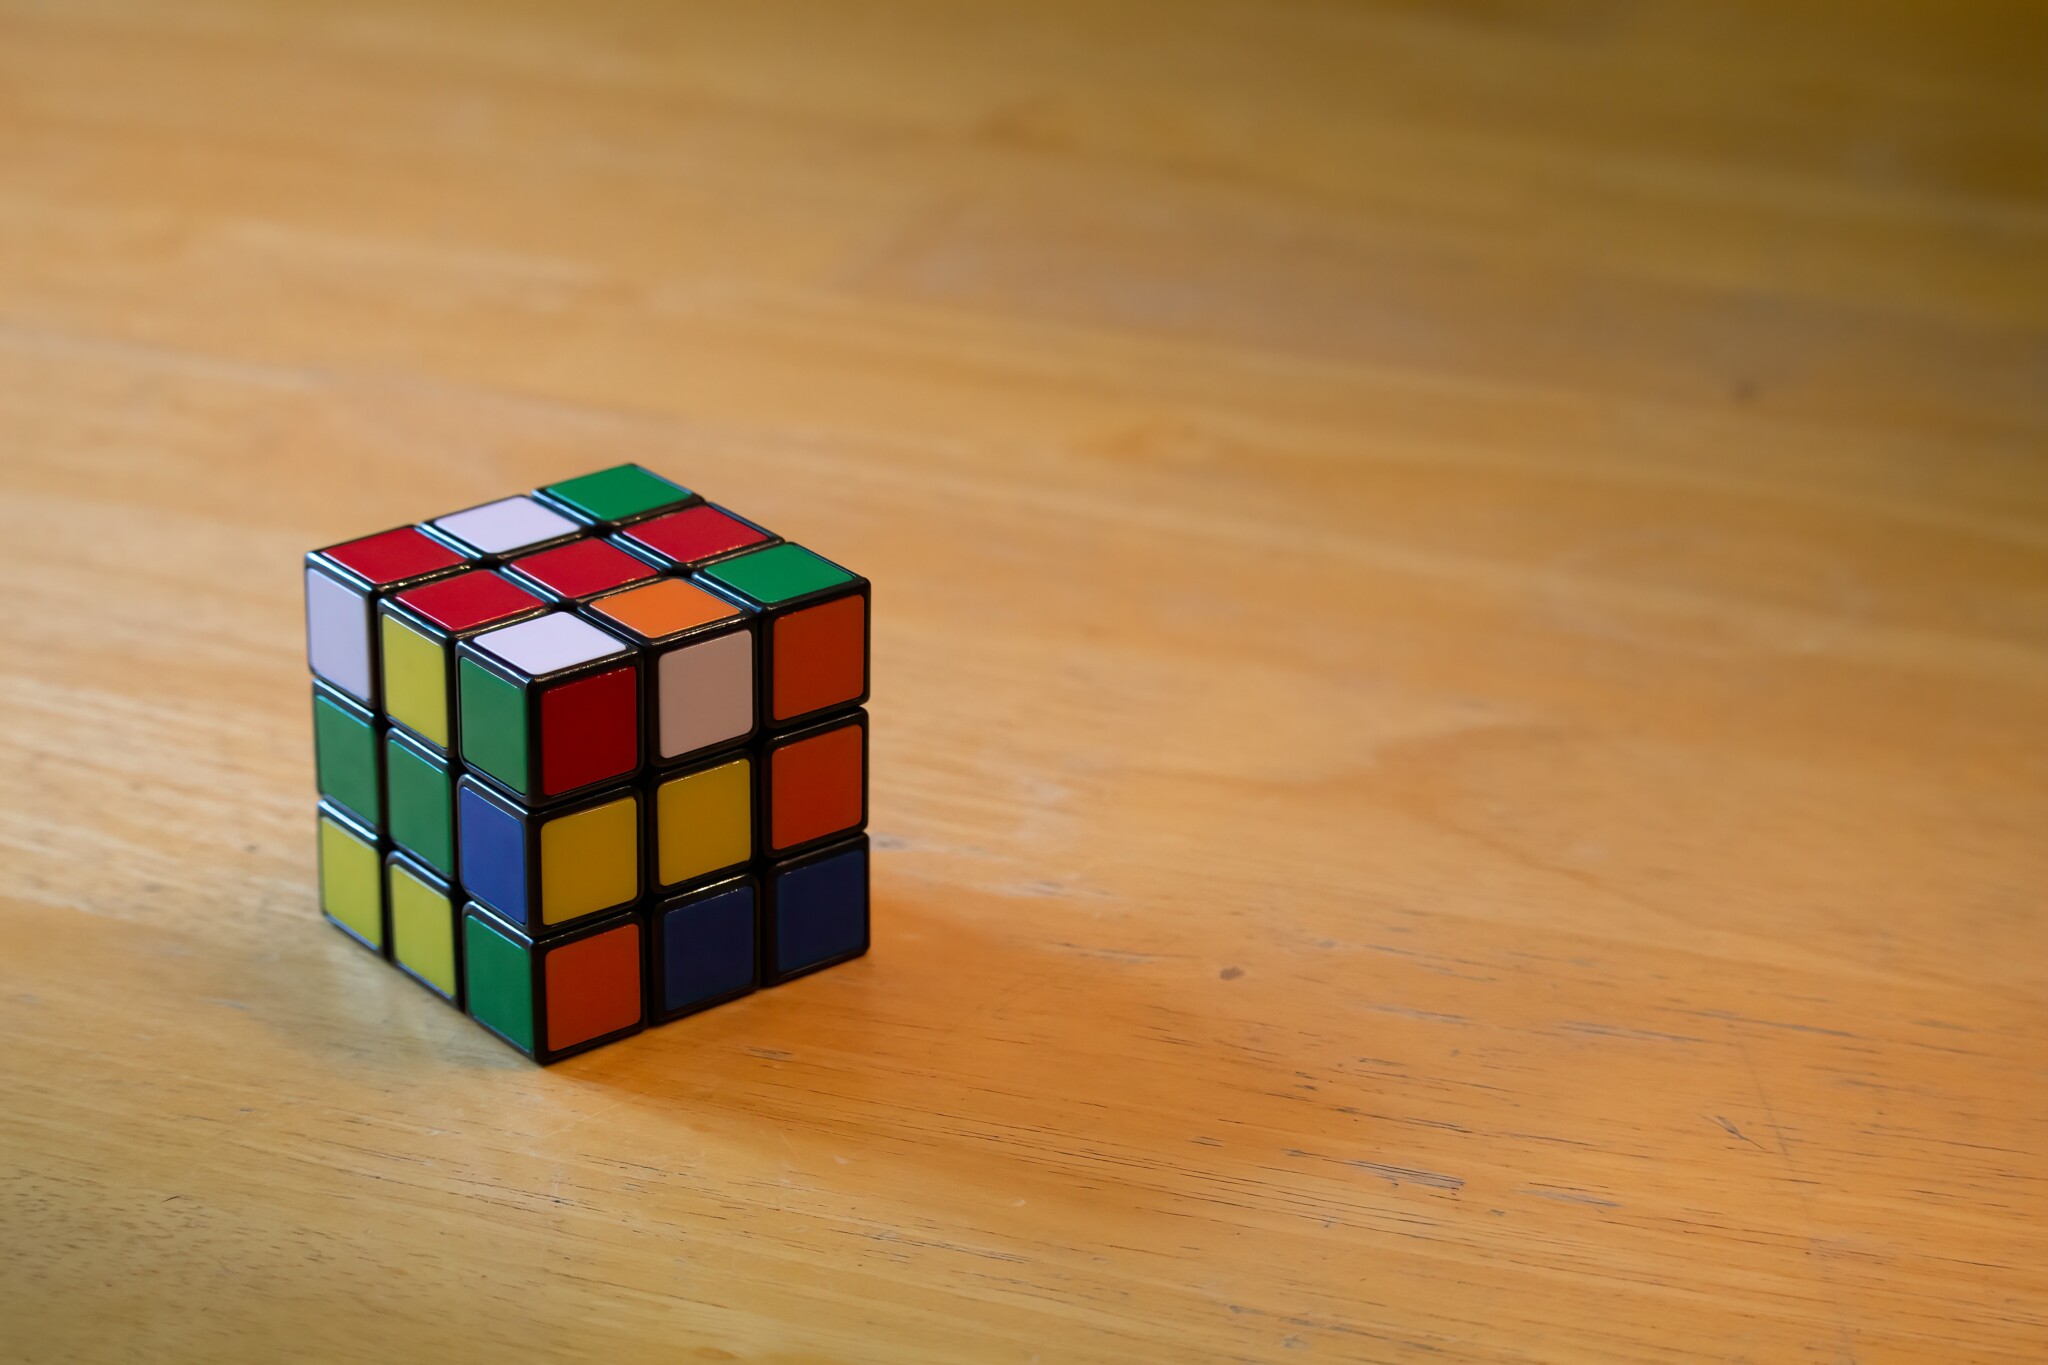 The first Rubik's Cube Prototype - The invention of Erno Rubik